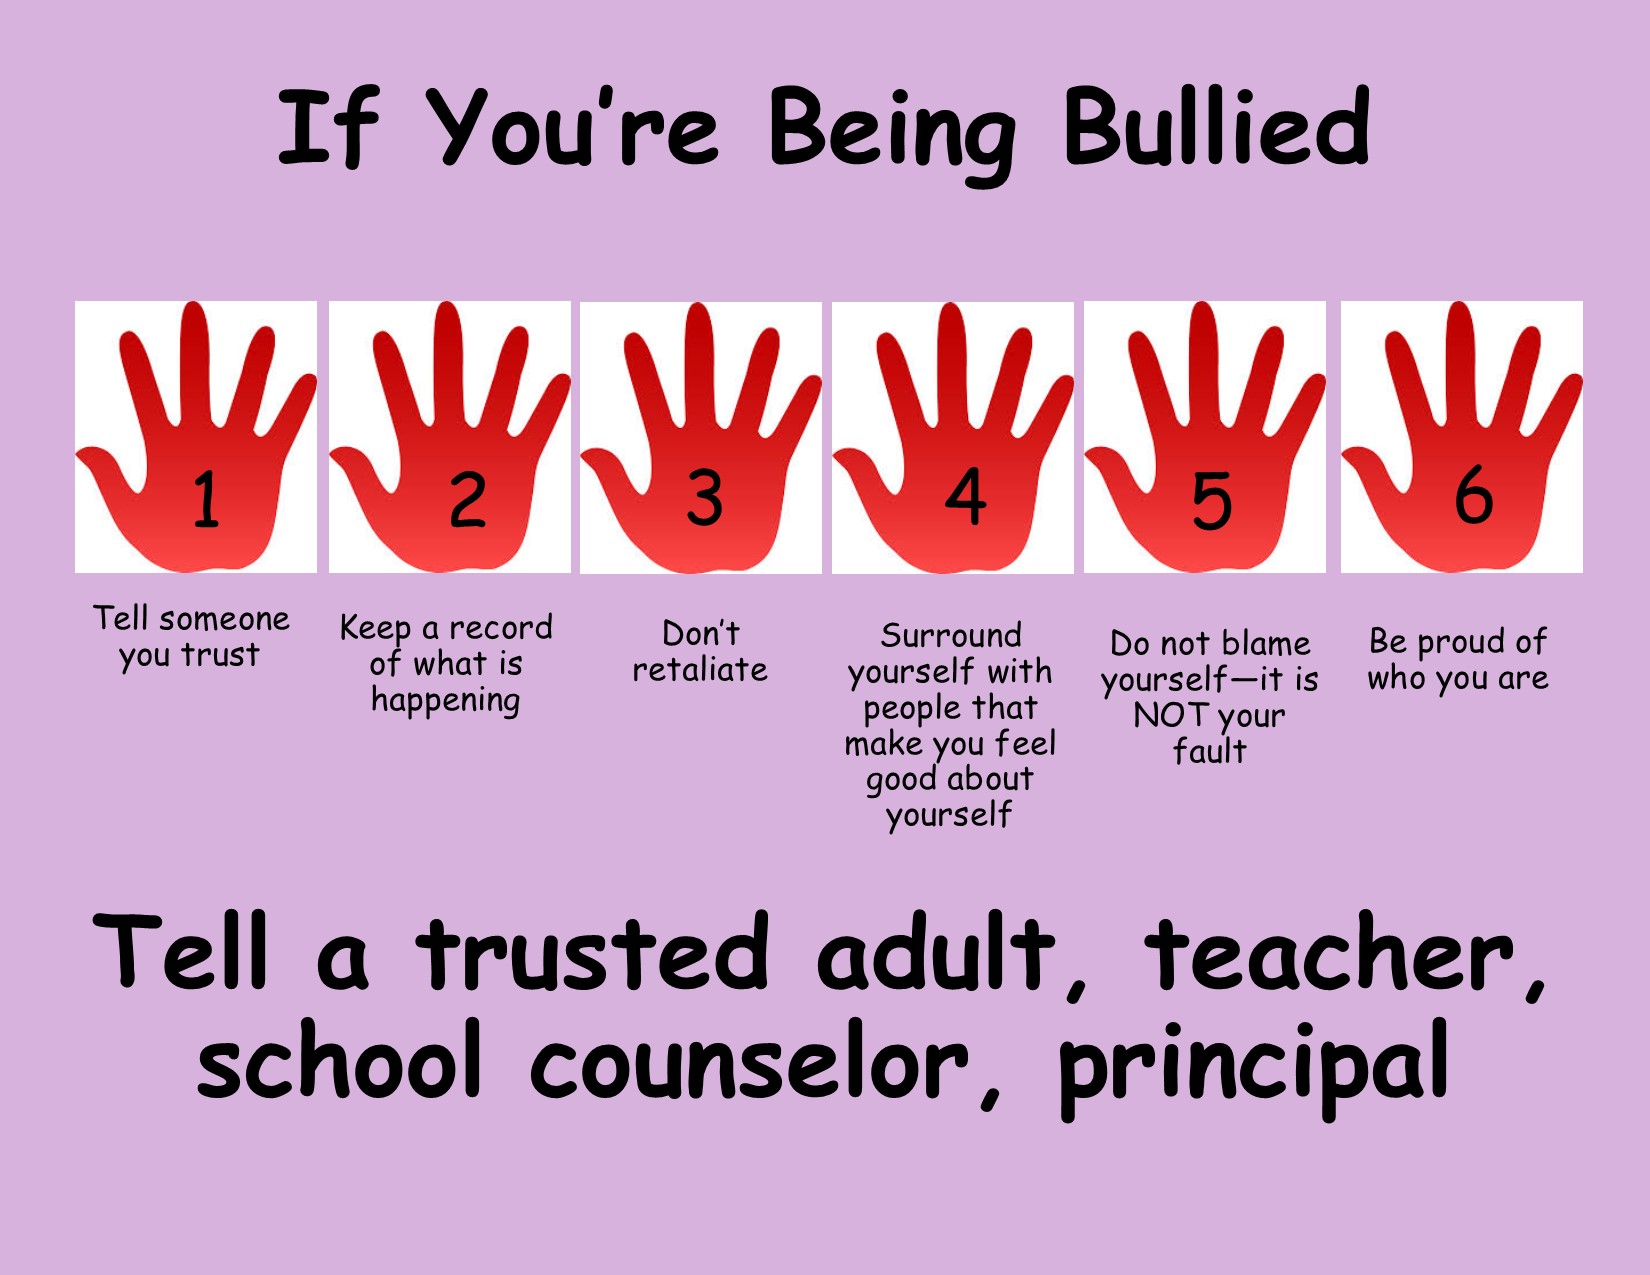 If you are being bullied, "tell a trusted adult, teacher, school counselor, principal" 